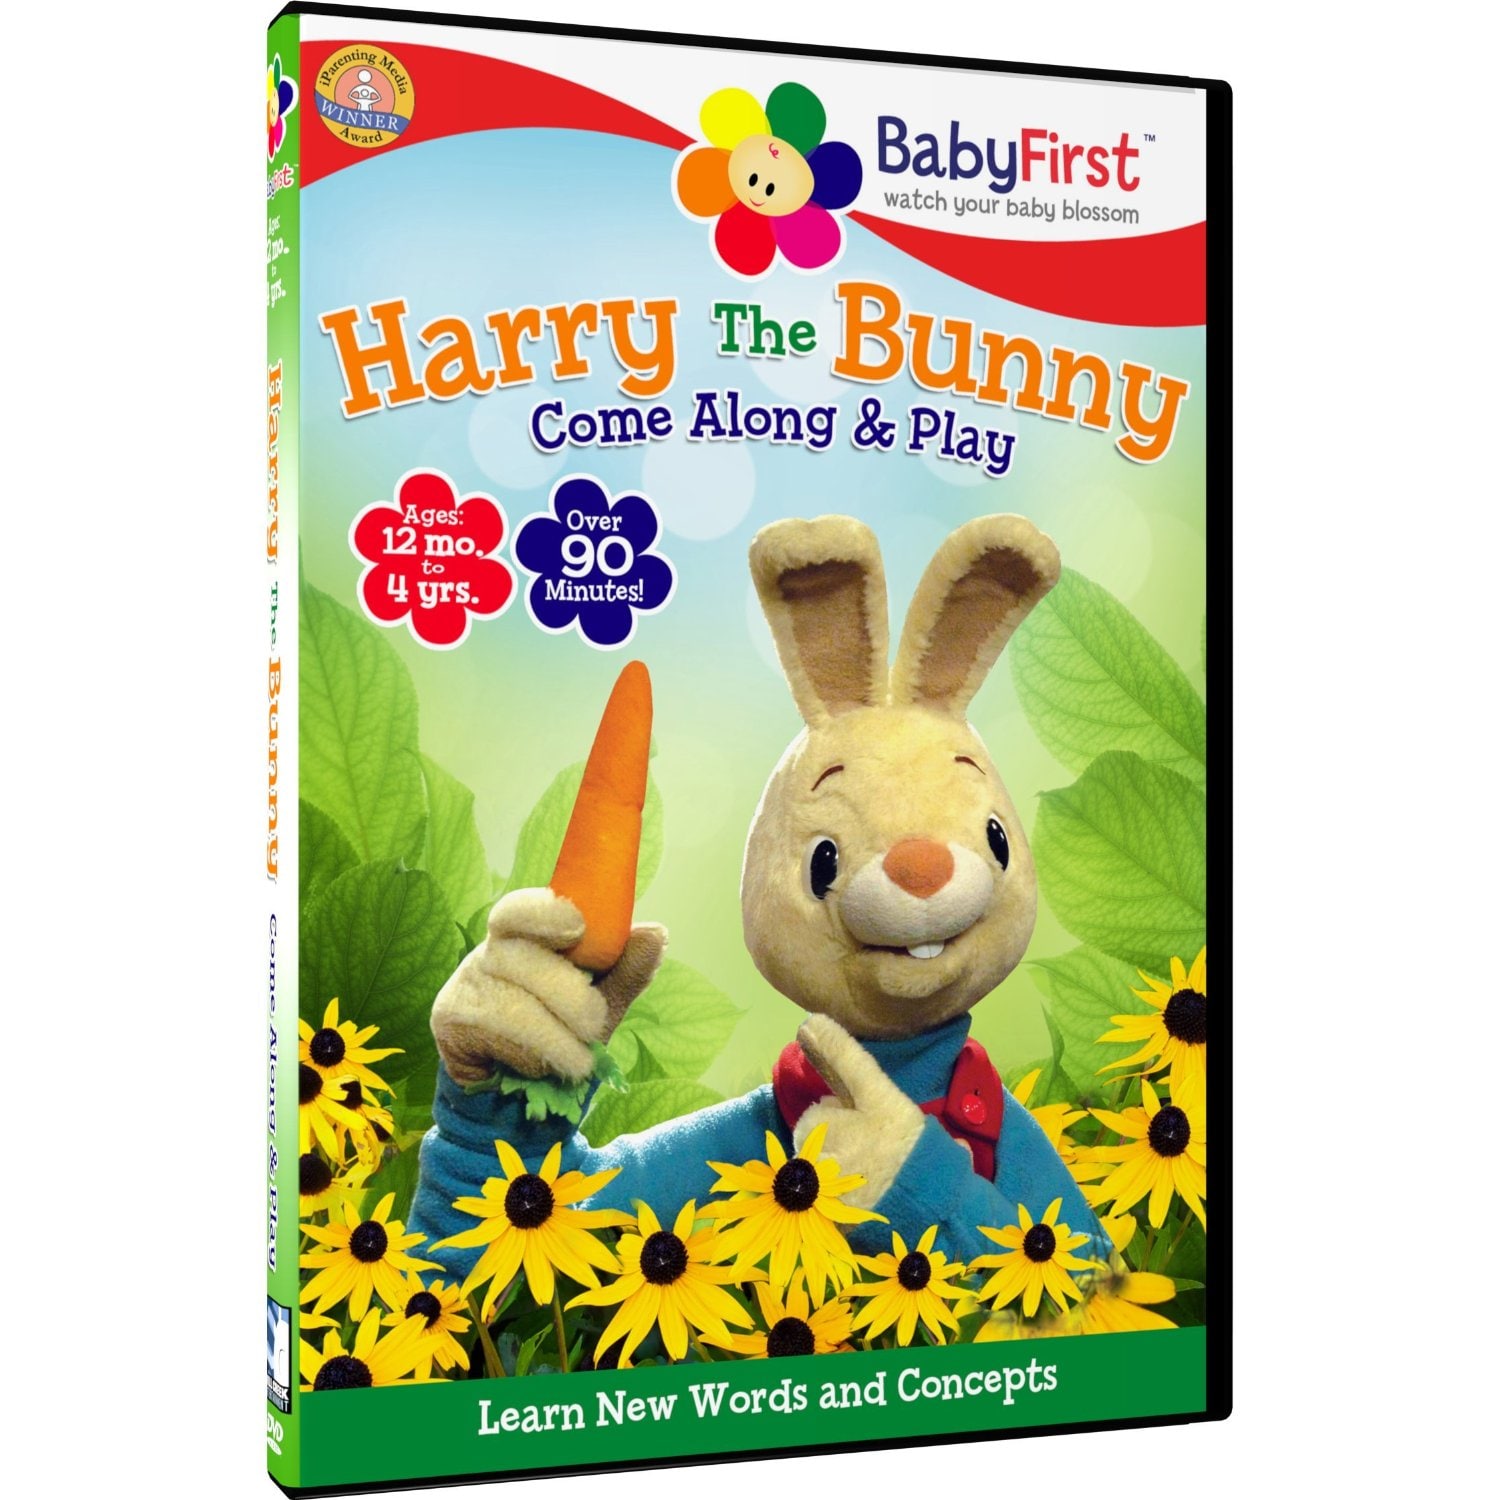 Harry the Bunny Come along and Play (DVD)   Shopping   The